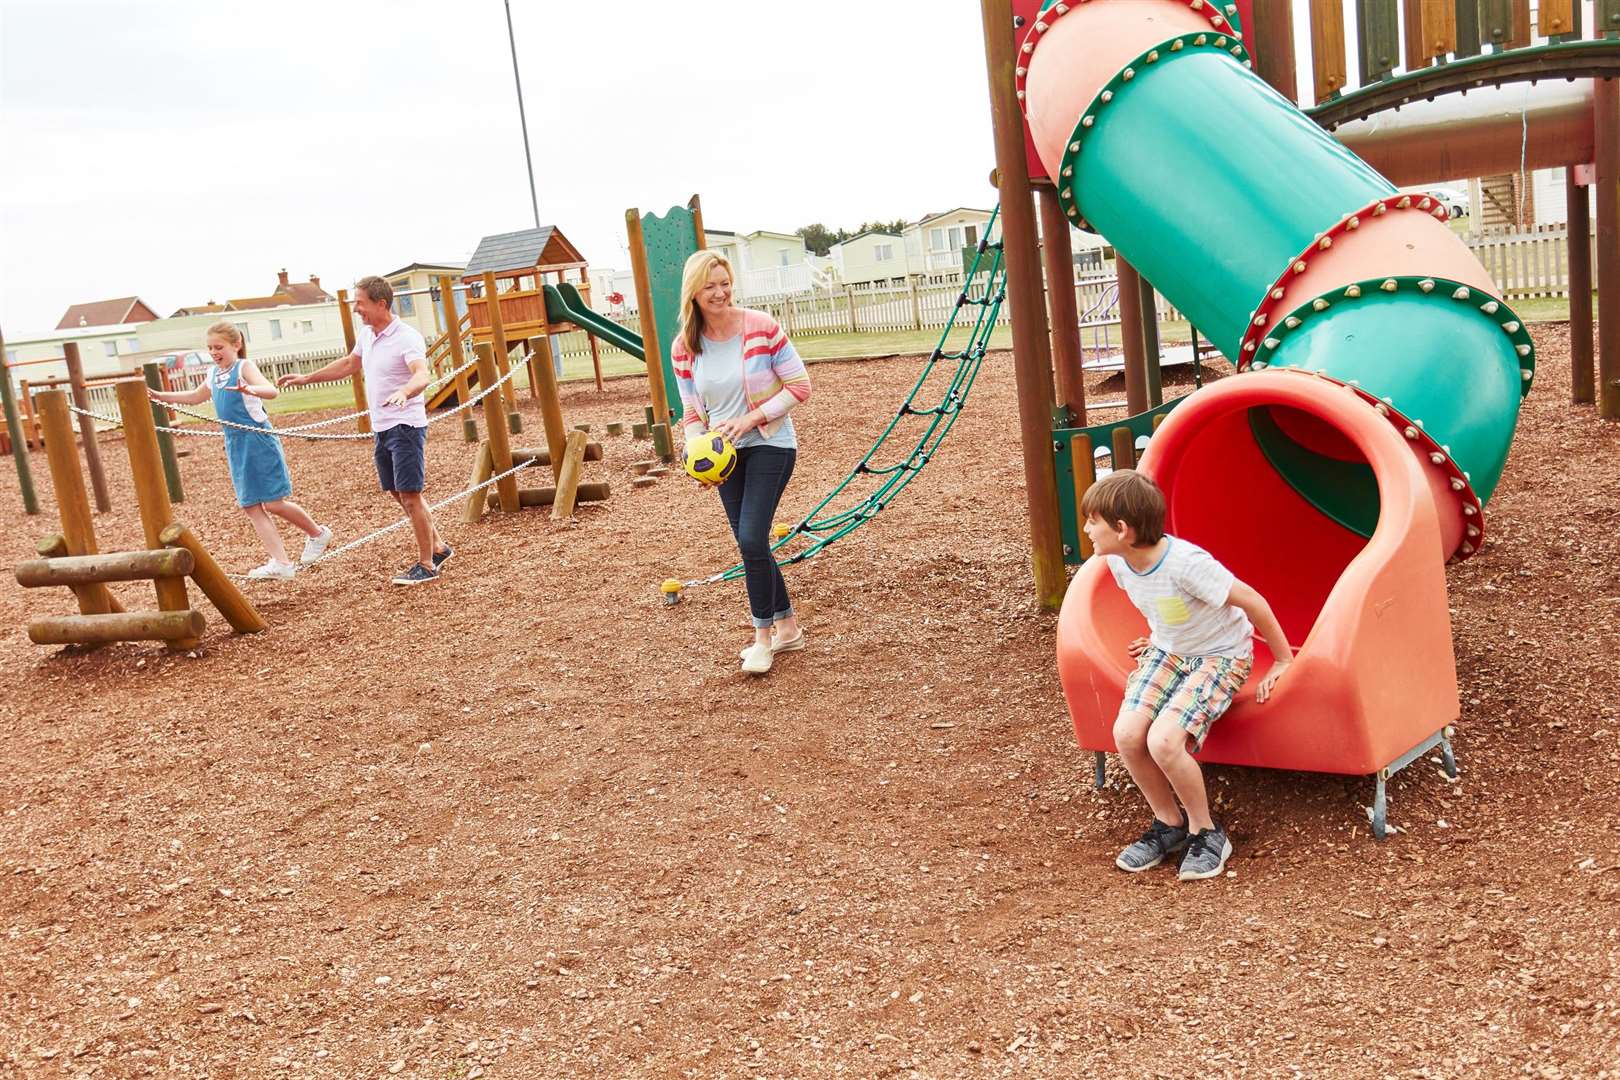 The playpark at Parkdean Resort, Romney Sands. PIcture: Matt Keal Photography (3520284)